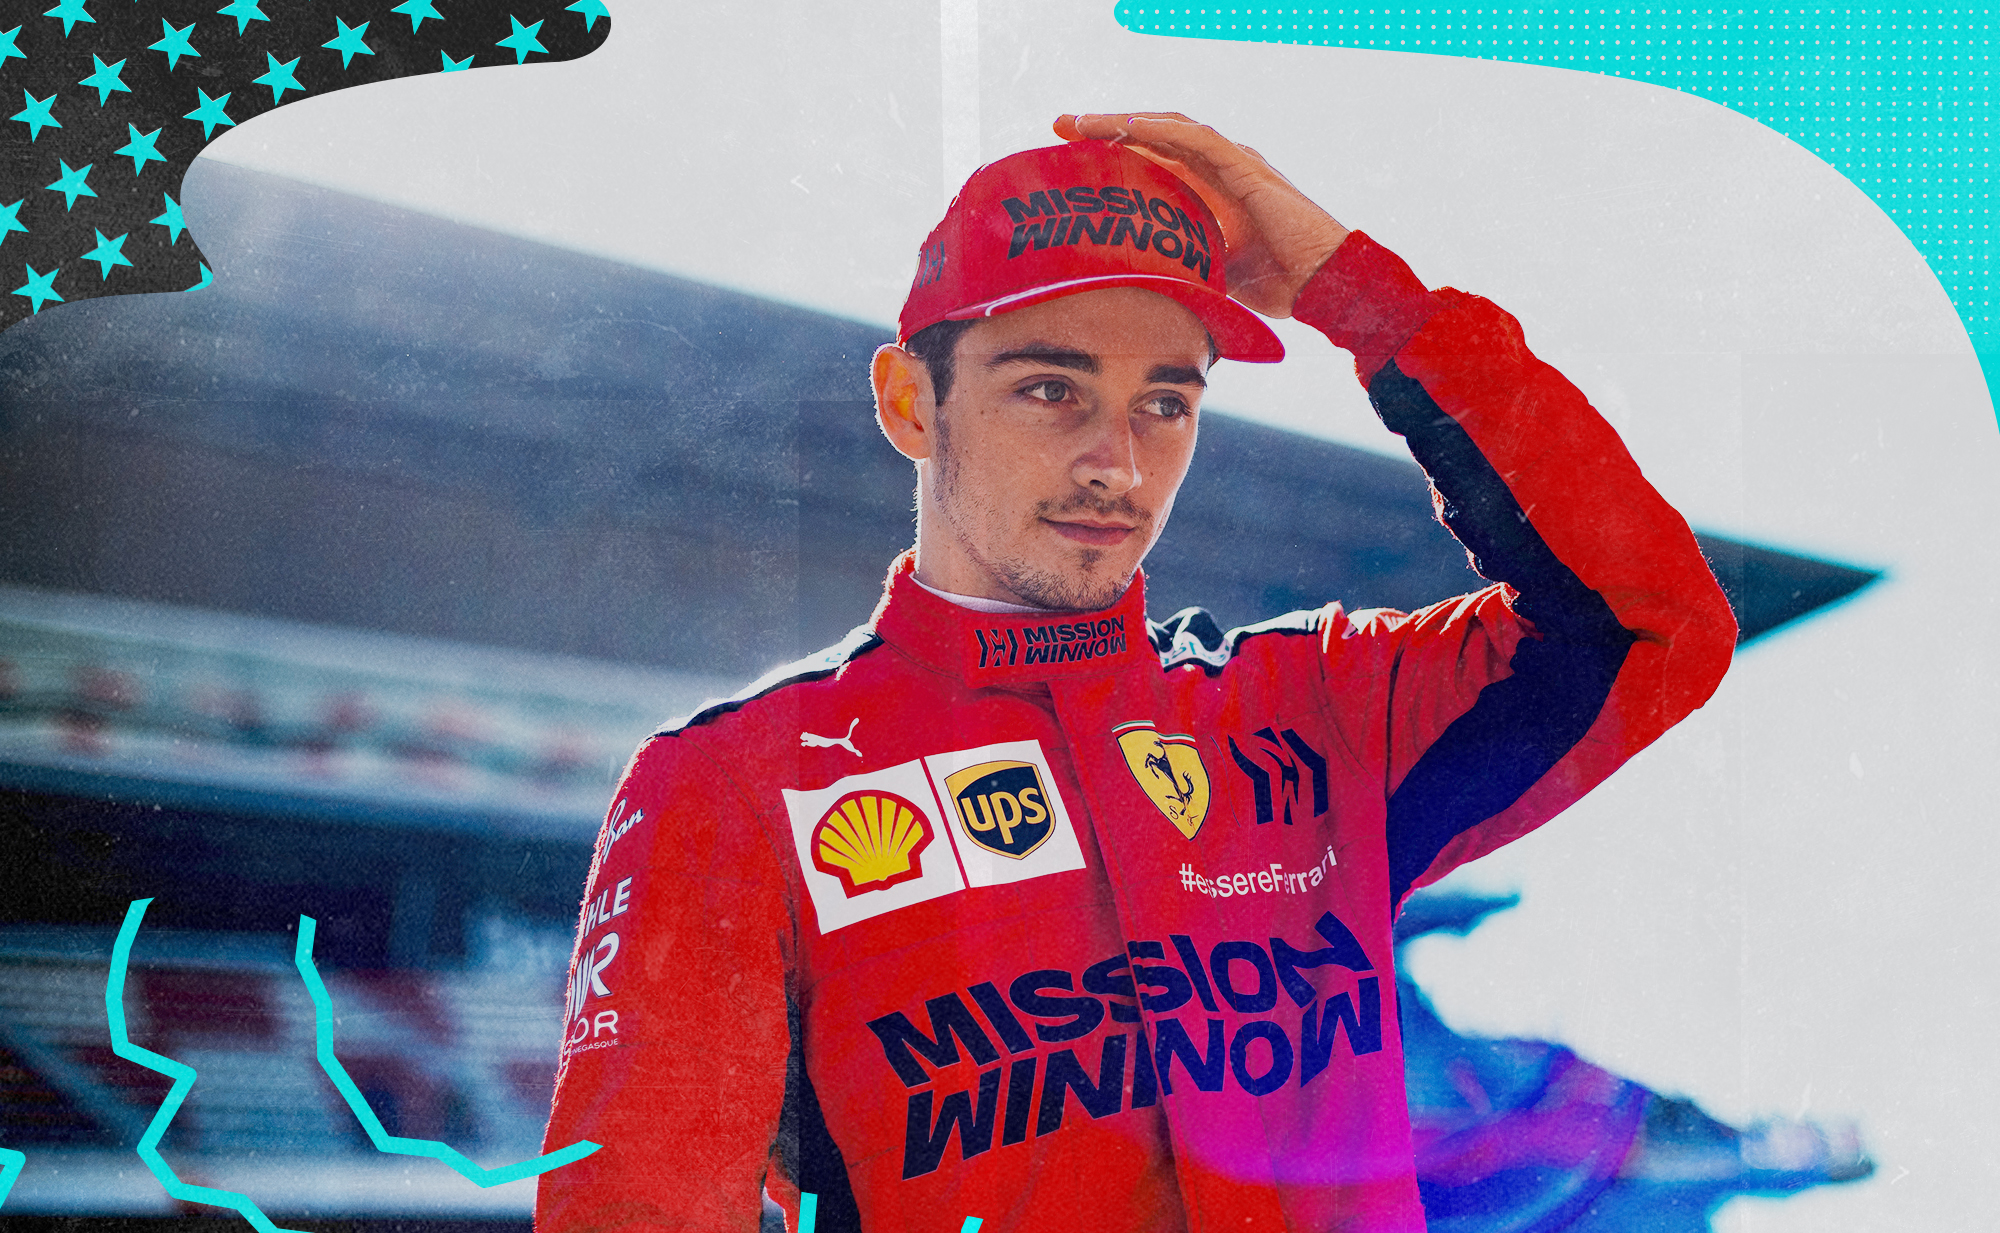 Charles Leclerc in his Ferrari track suit and cap before a race.